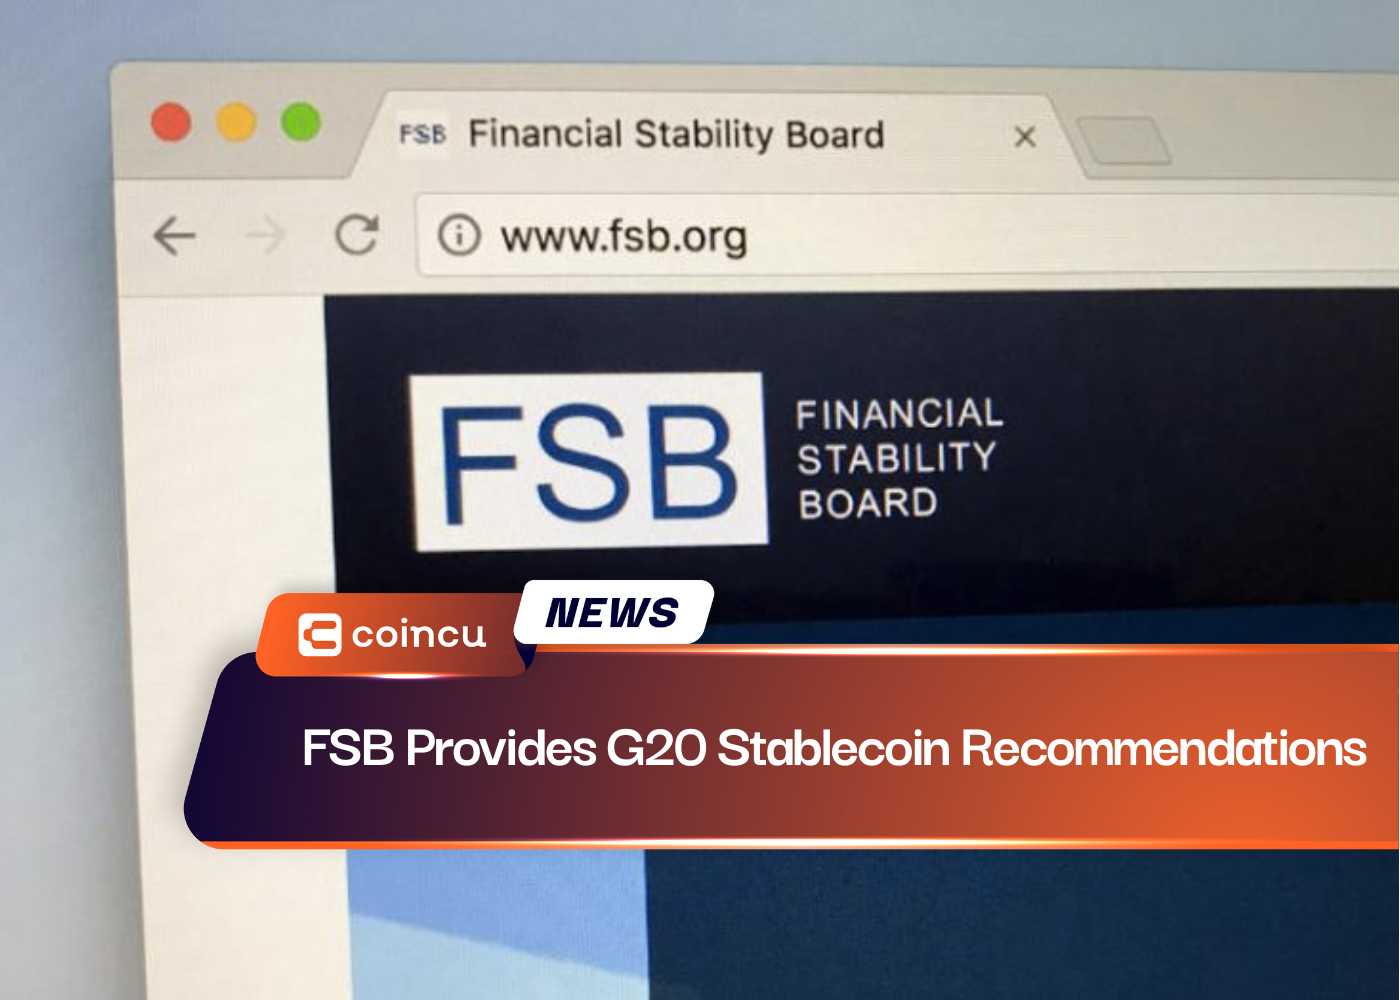 FSB Provides G20 Stablecoin Recommendations